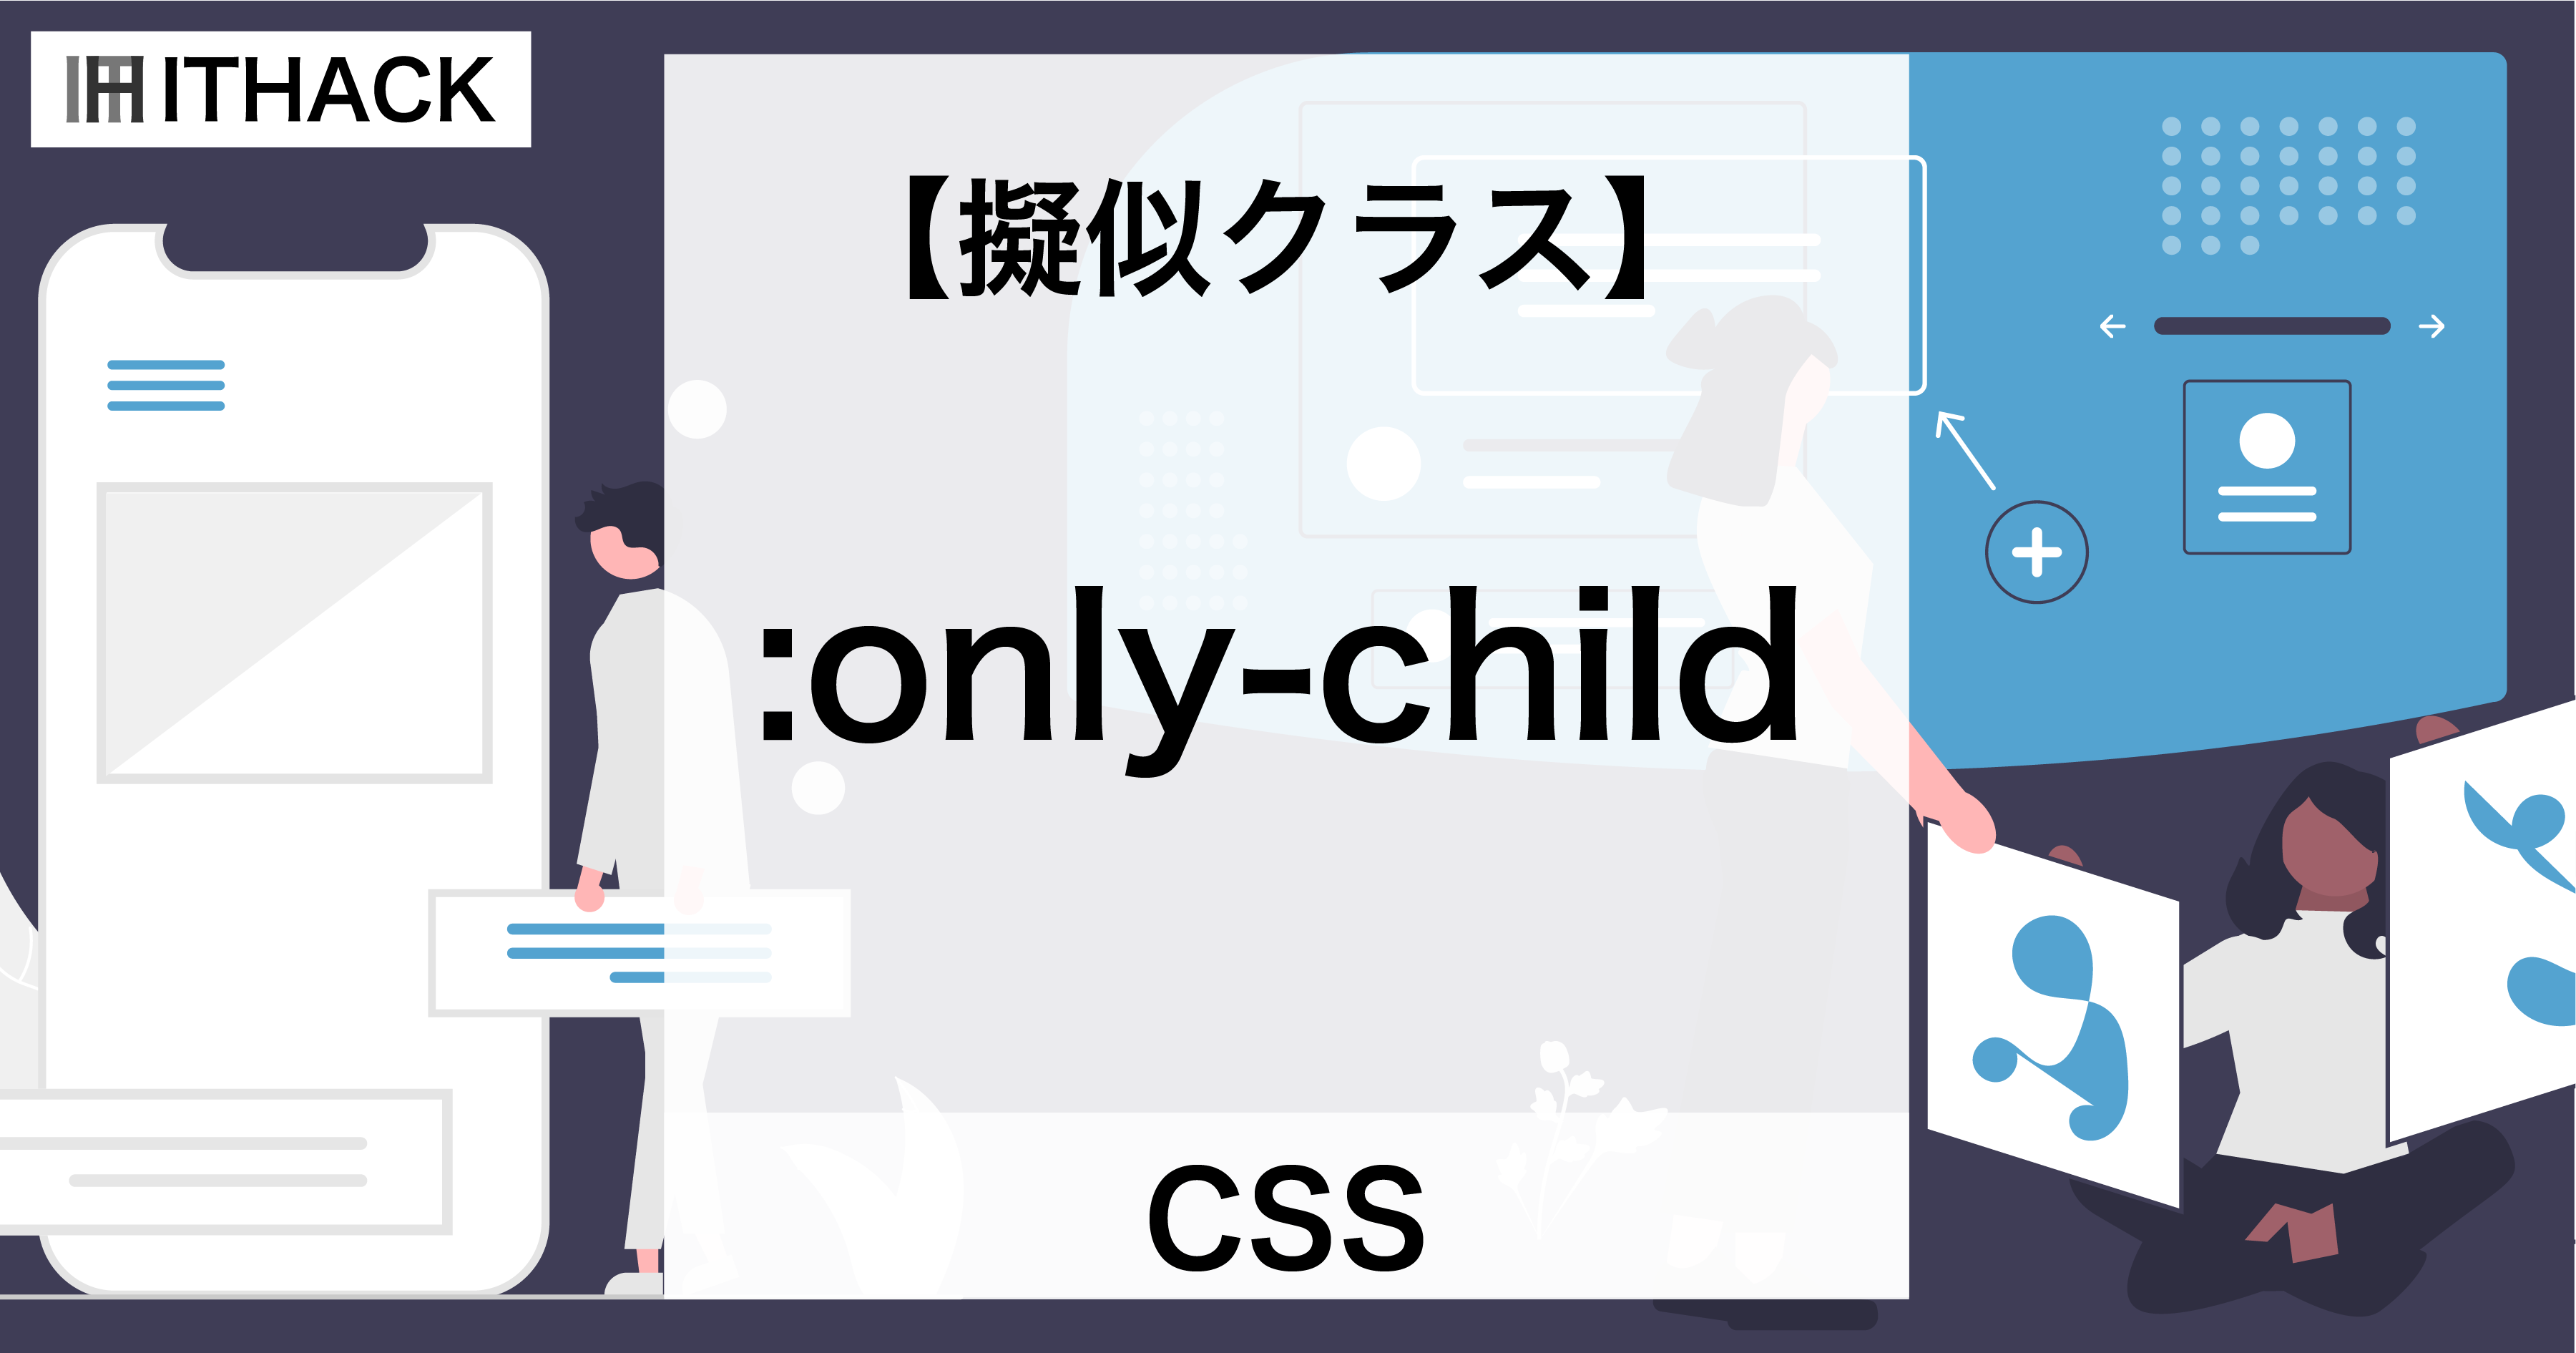 【CSS】:only-child（擬似クラス） - １つのみの要素